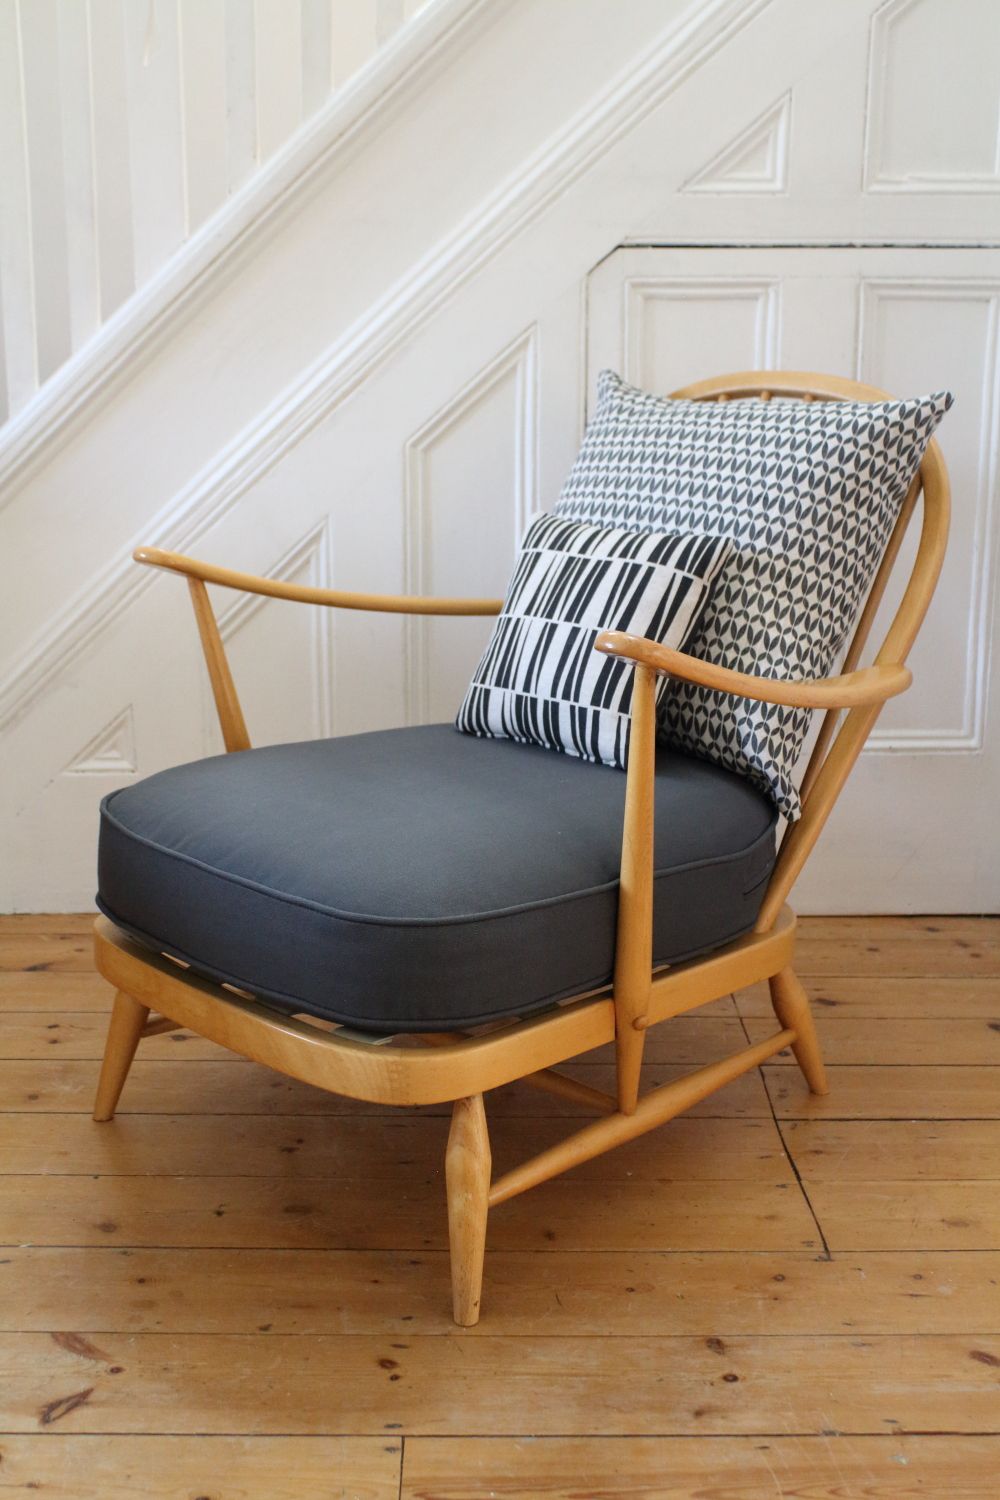 How to Choose the Perfect Easy Chair for
Your Living Room